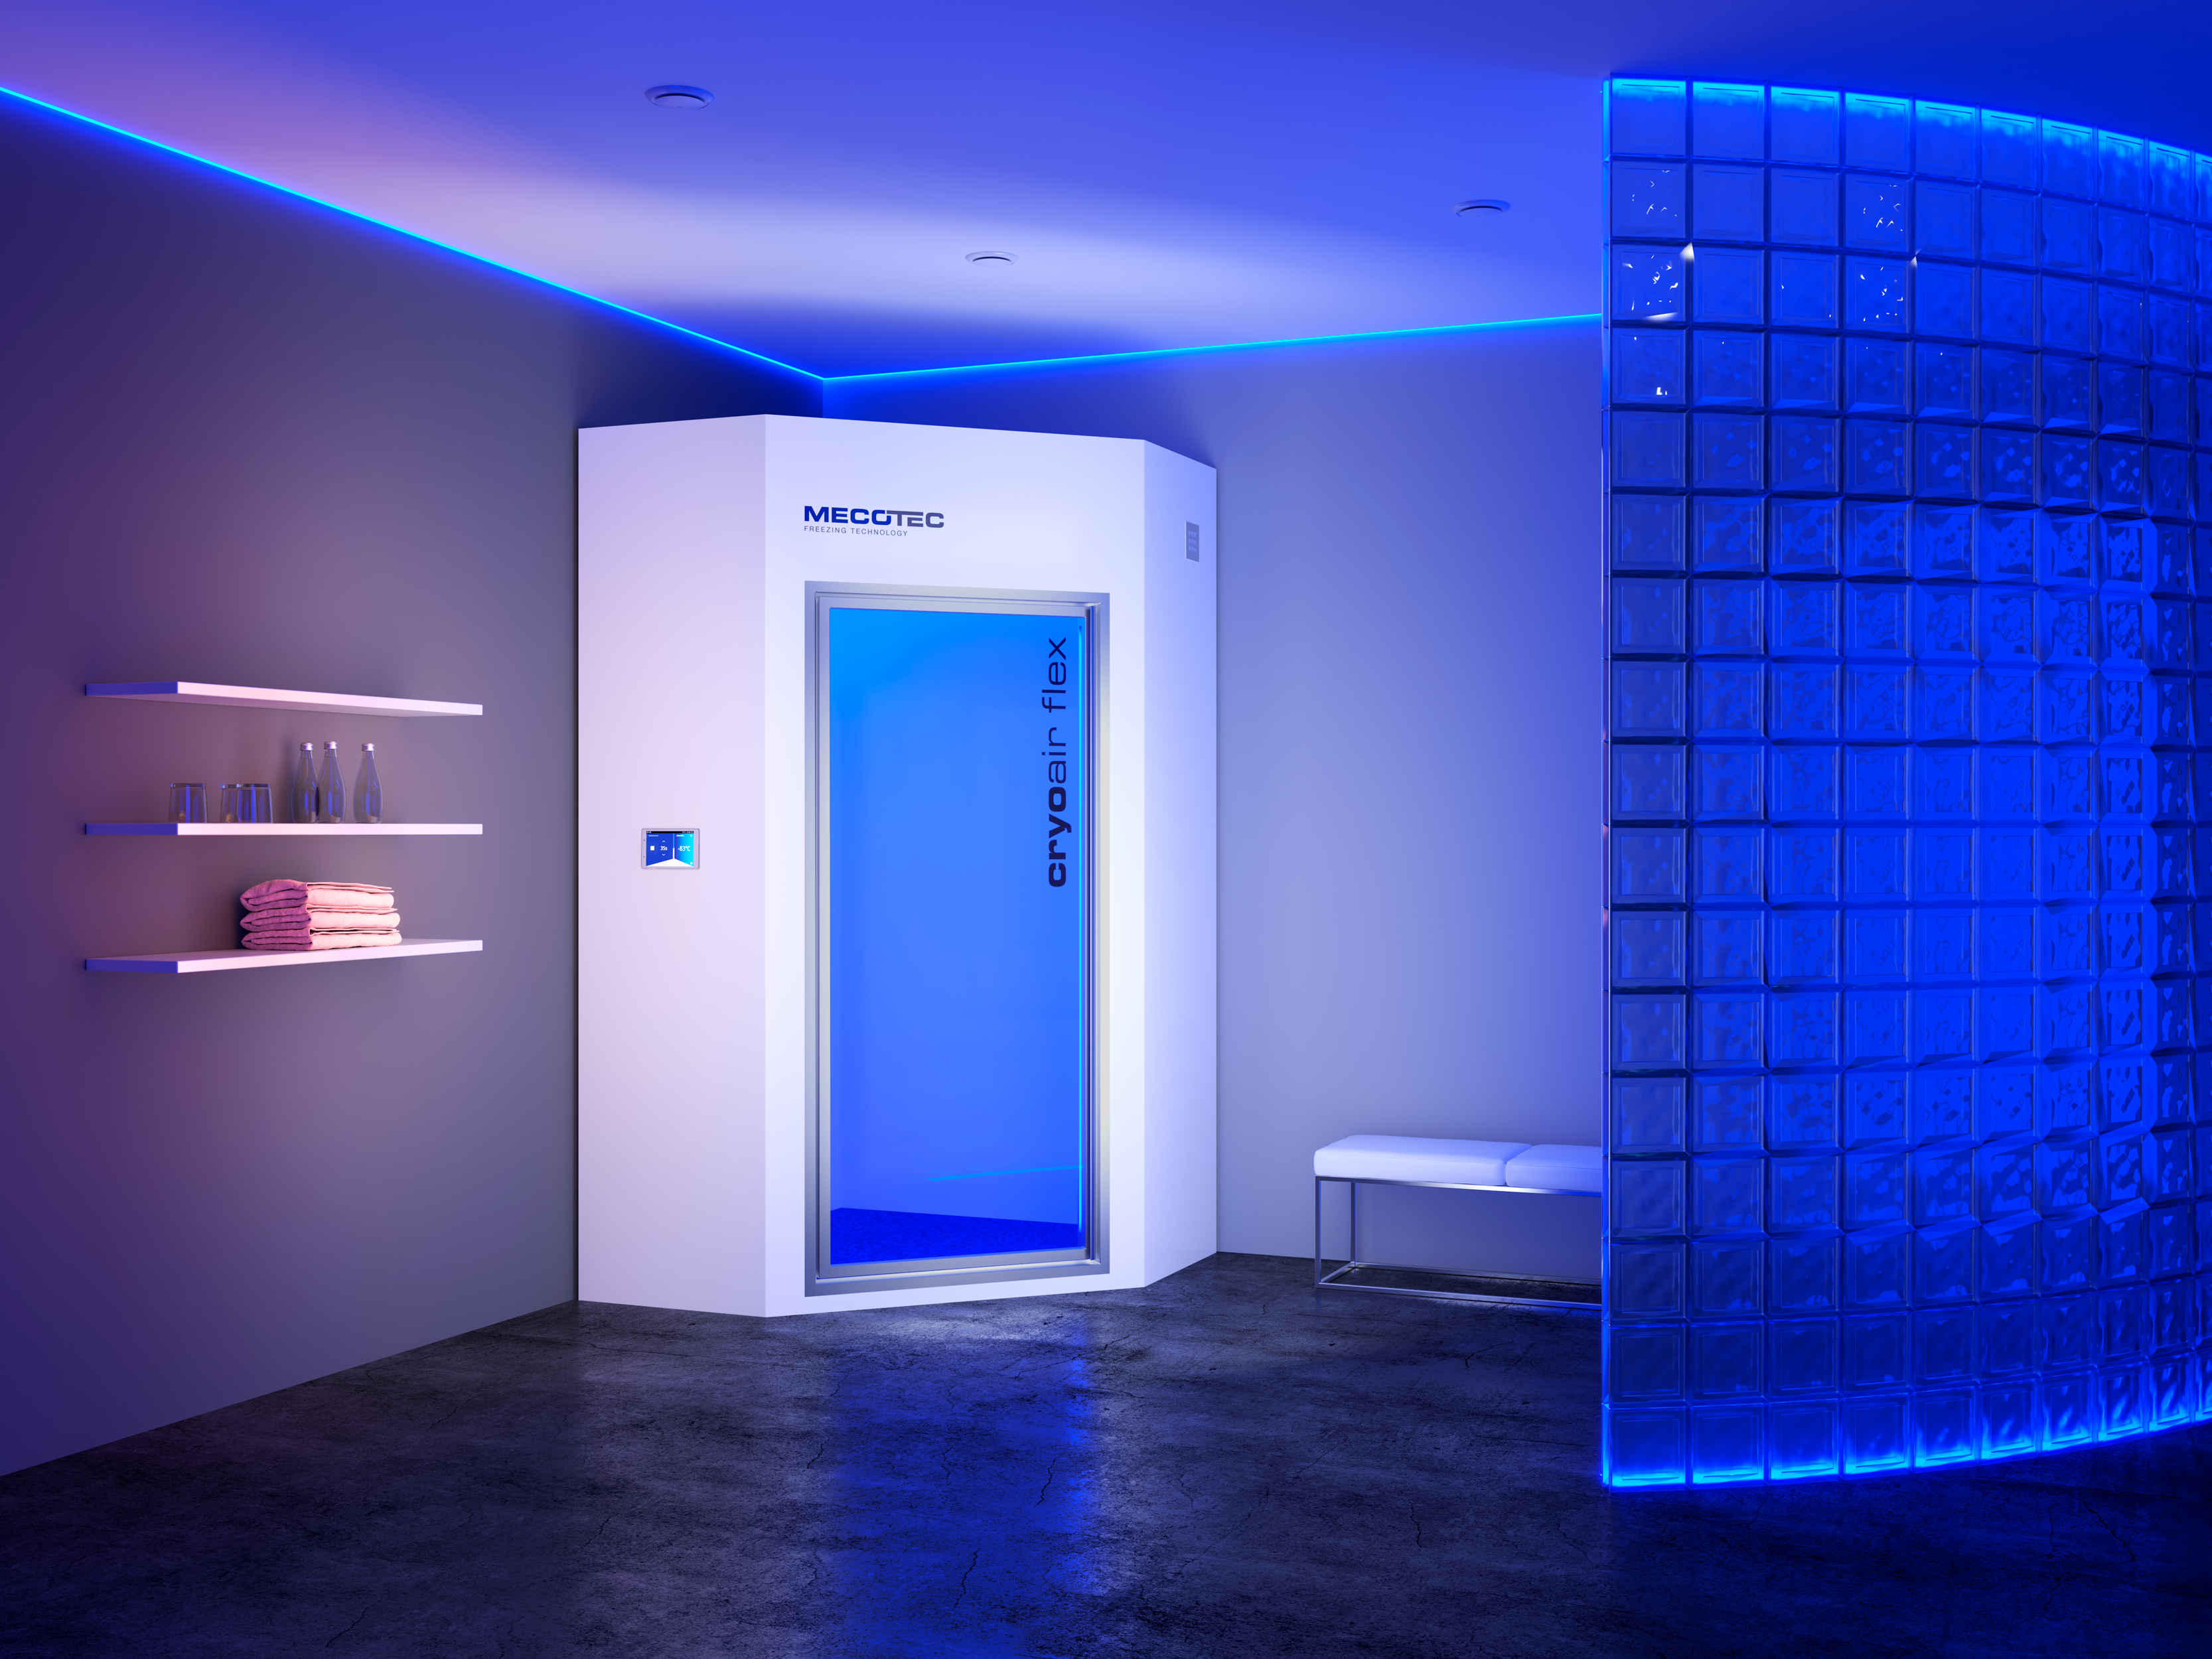 An image of RPXs Mecotec whole body cryotherapy chamber